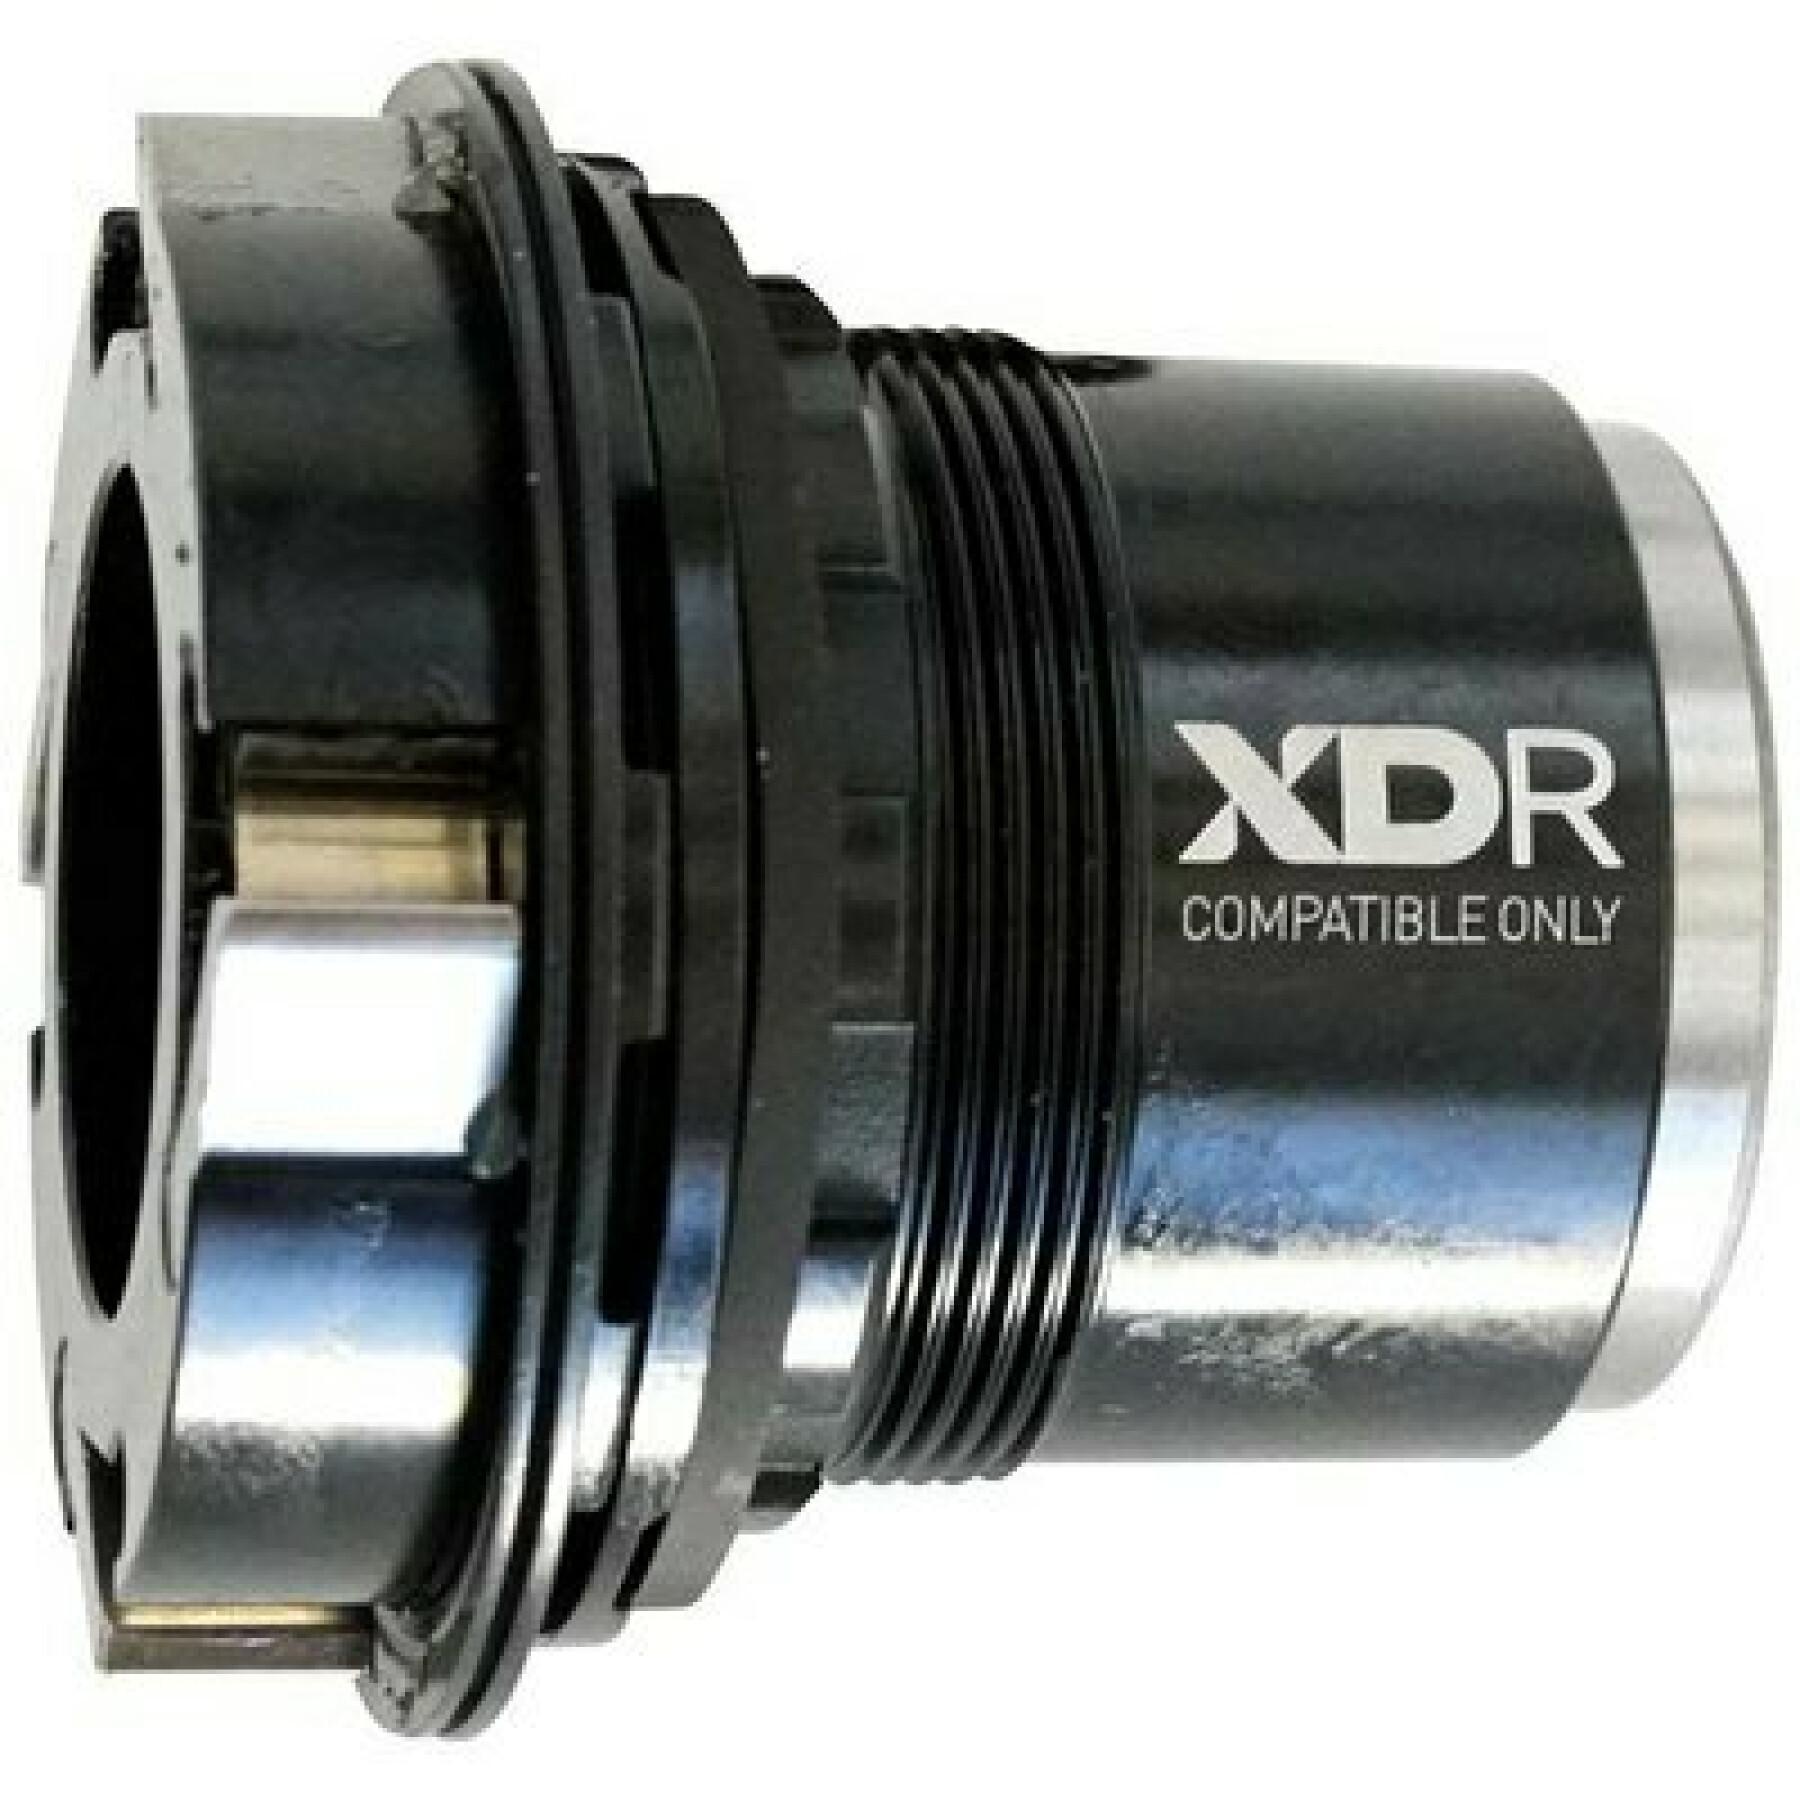 Piasty Sram Corps De Myeu A/Rlts Double Time 11/12S Xd-R (28.6Mm Lg Driver) - 900